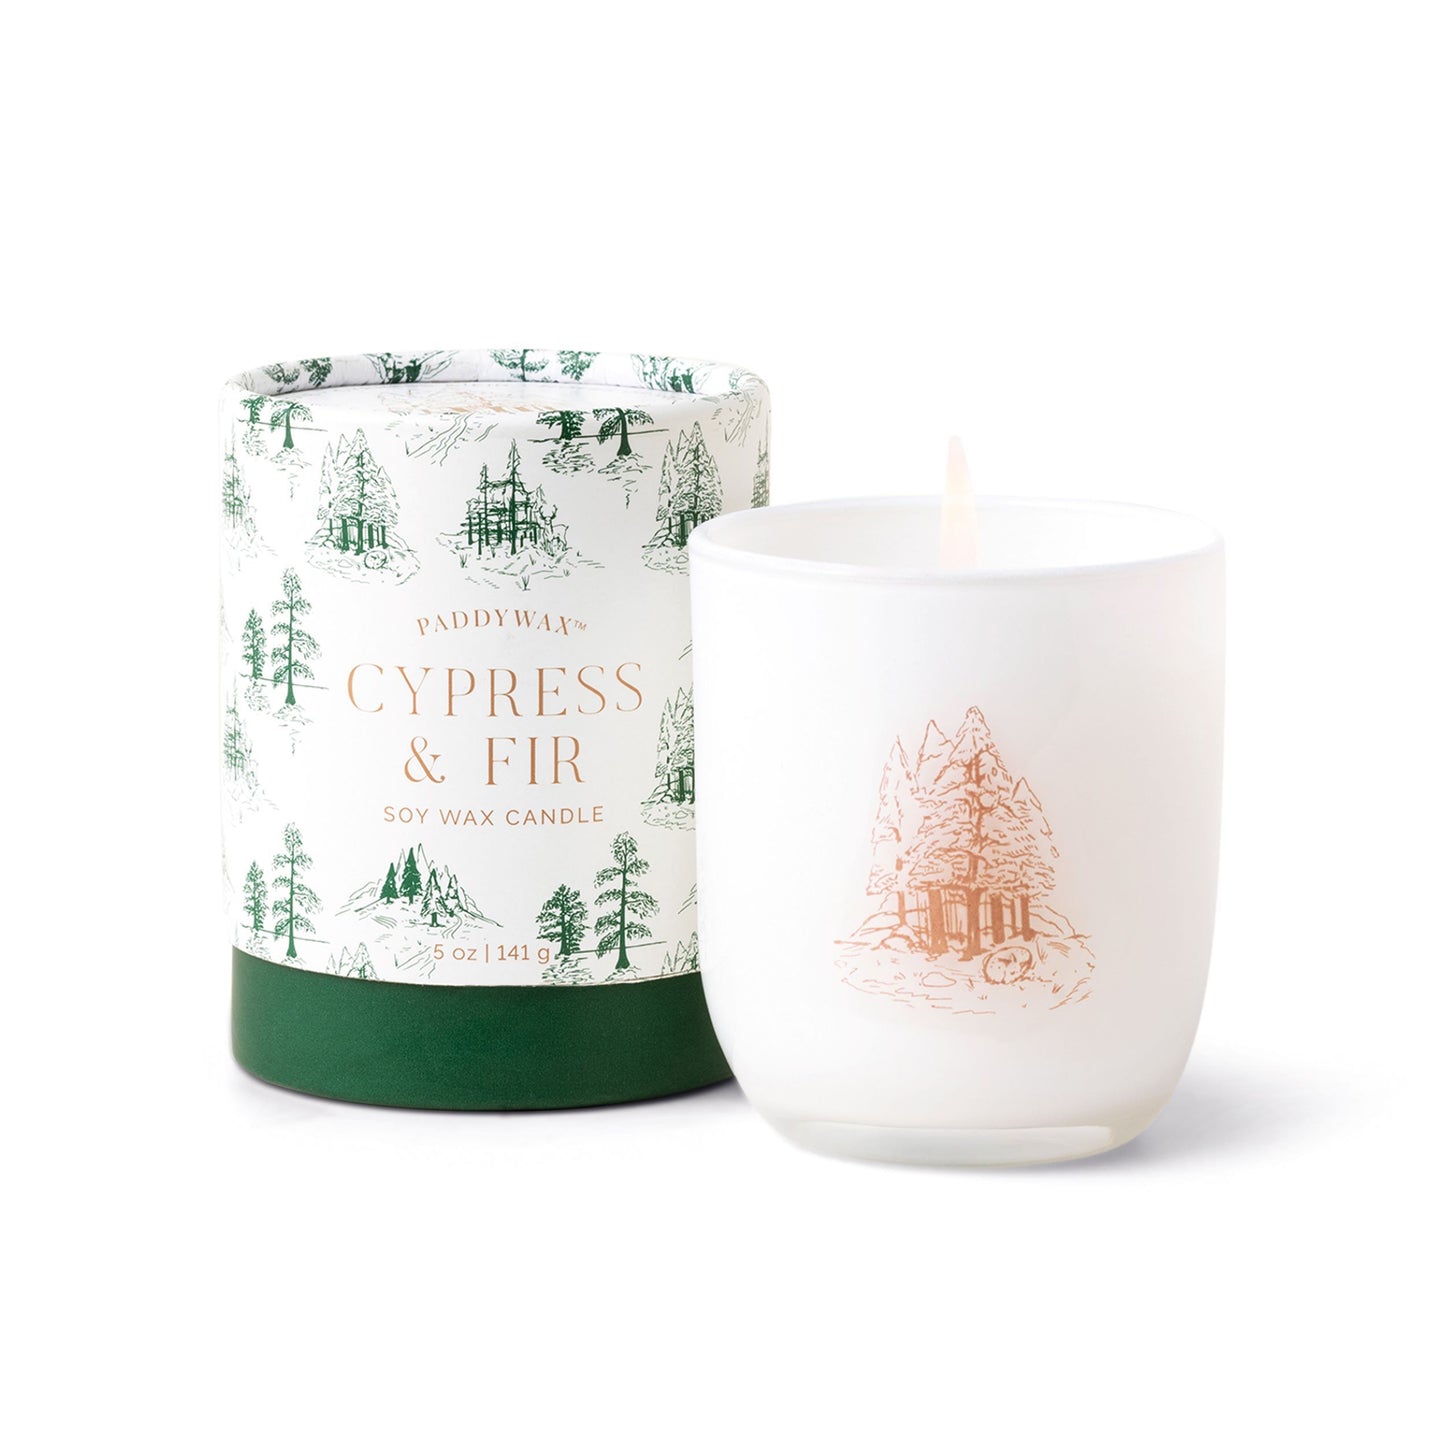 white opaque glass vessel with copper decal of fir trees; pictured next to white cylindrical candle holder with green fir trees on it